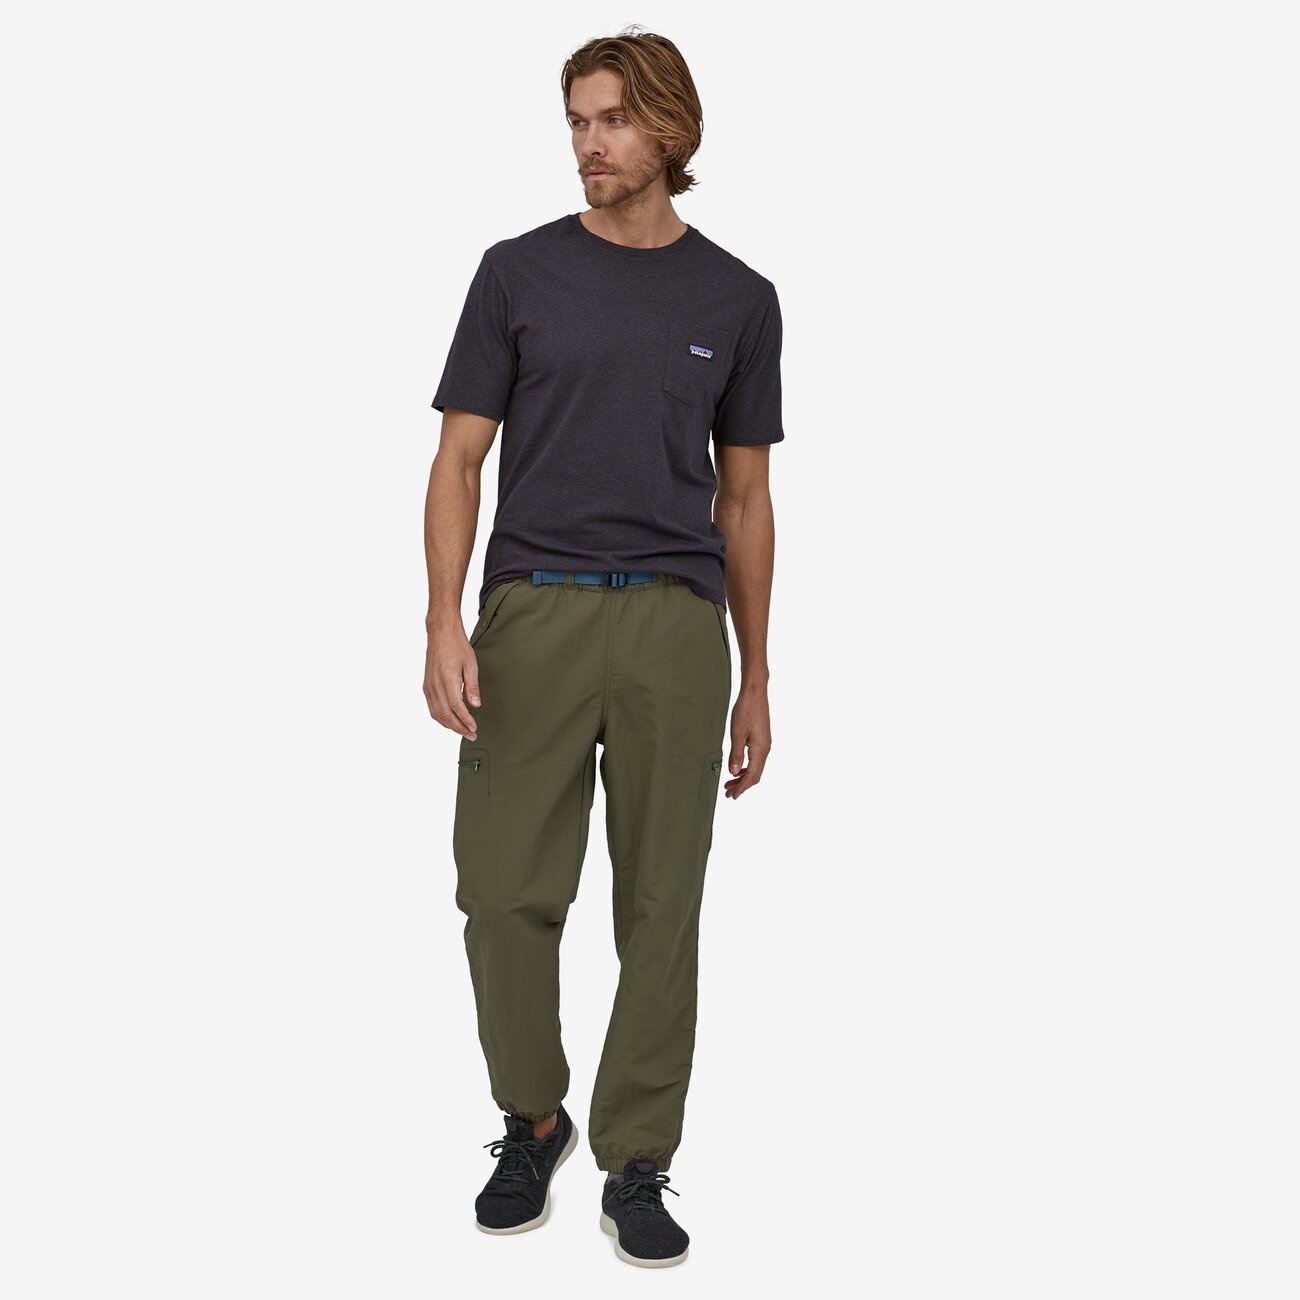 Patagonia Men's Outdoor Everyday Pants - RIGS Fly Shop